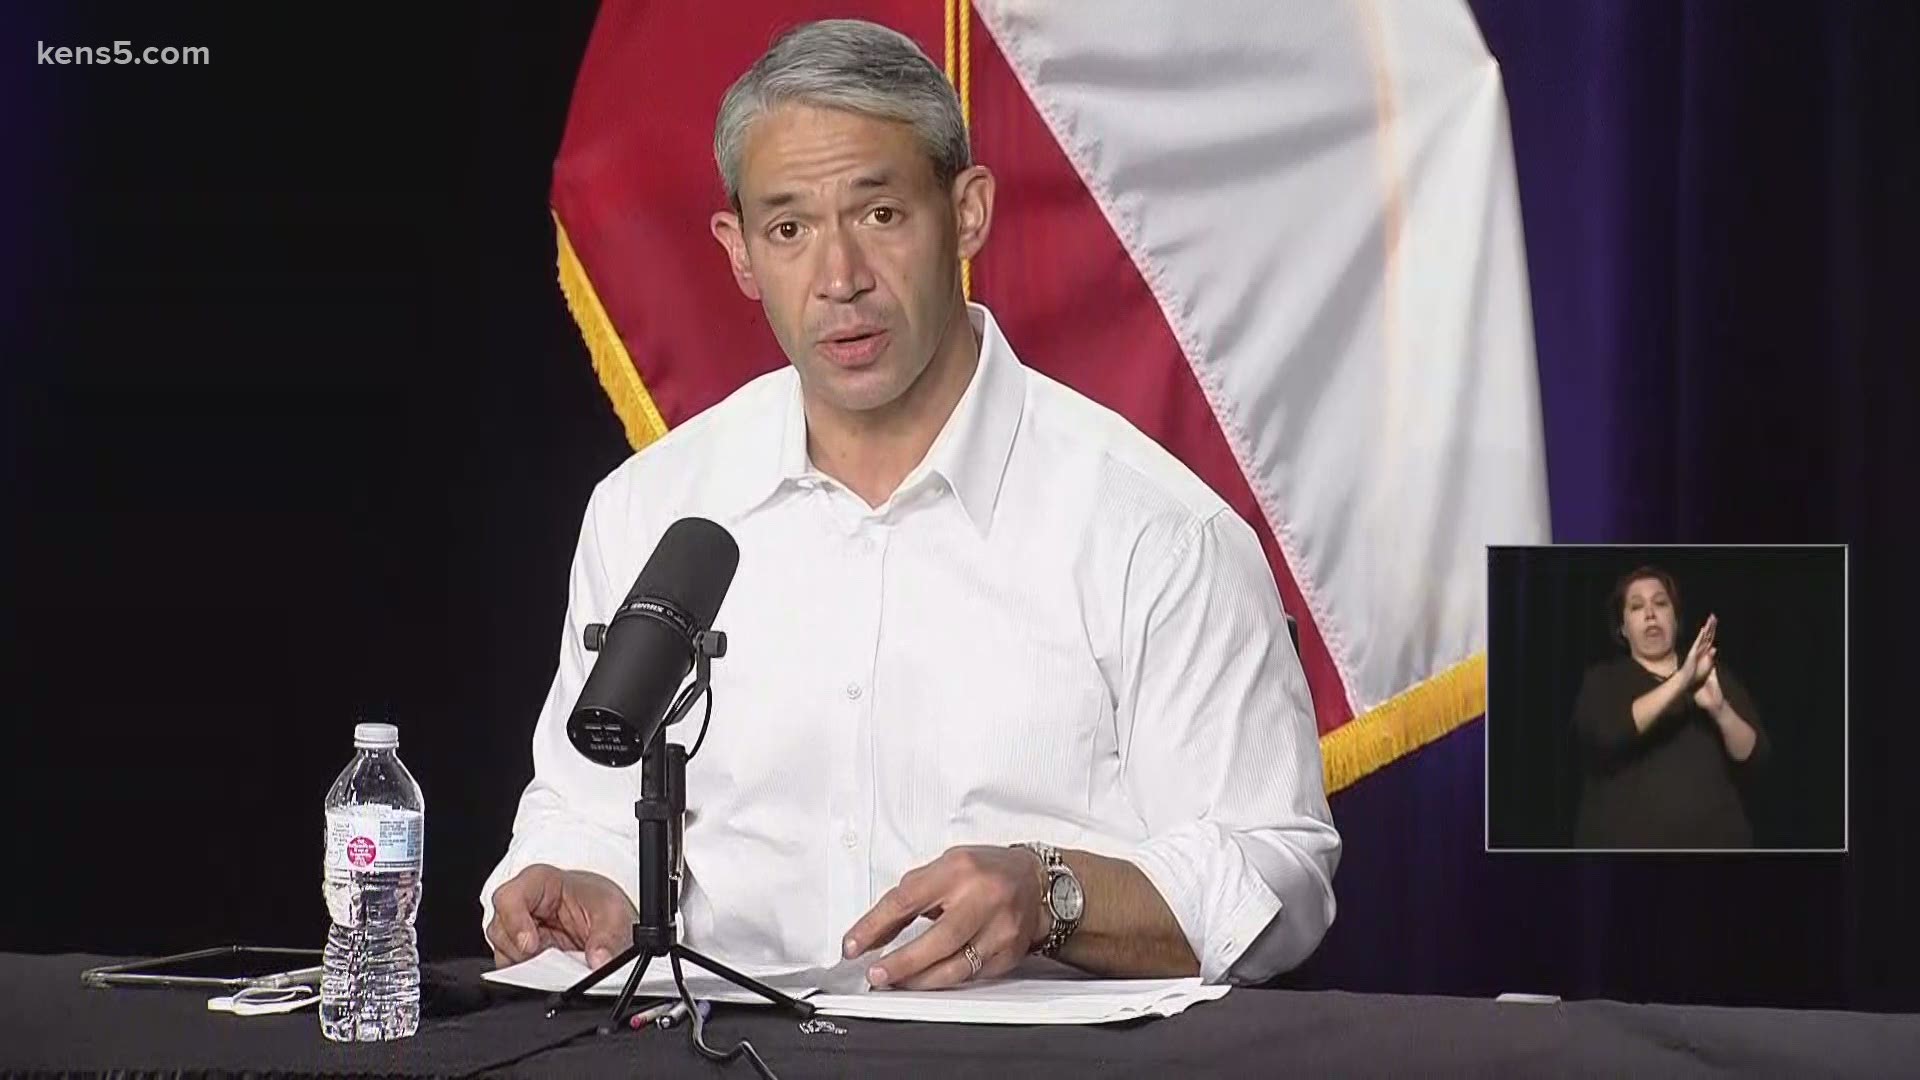 Mayor Nirenberg reported 185 new cases, bringing the total in Bexar County to 66,714. Five new deaths were reported, bringing the death toll to 1,265.